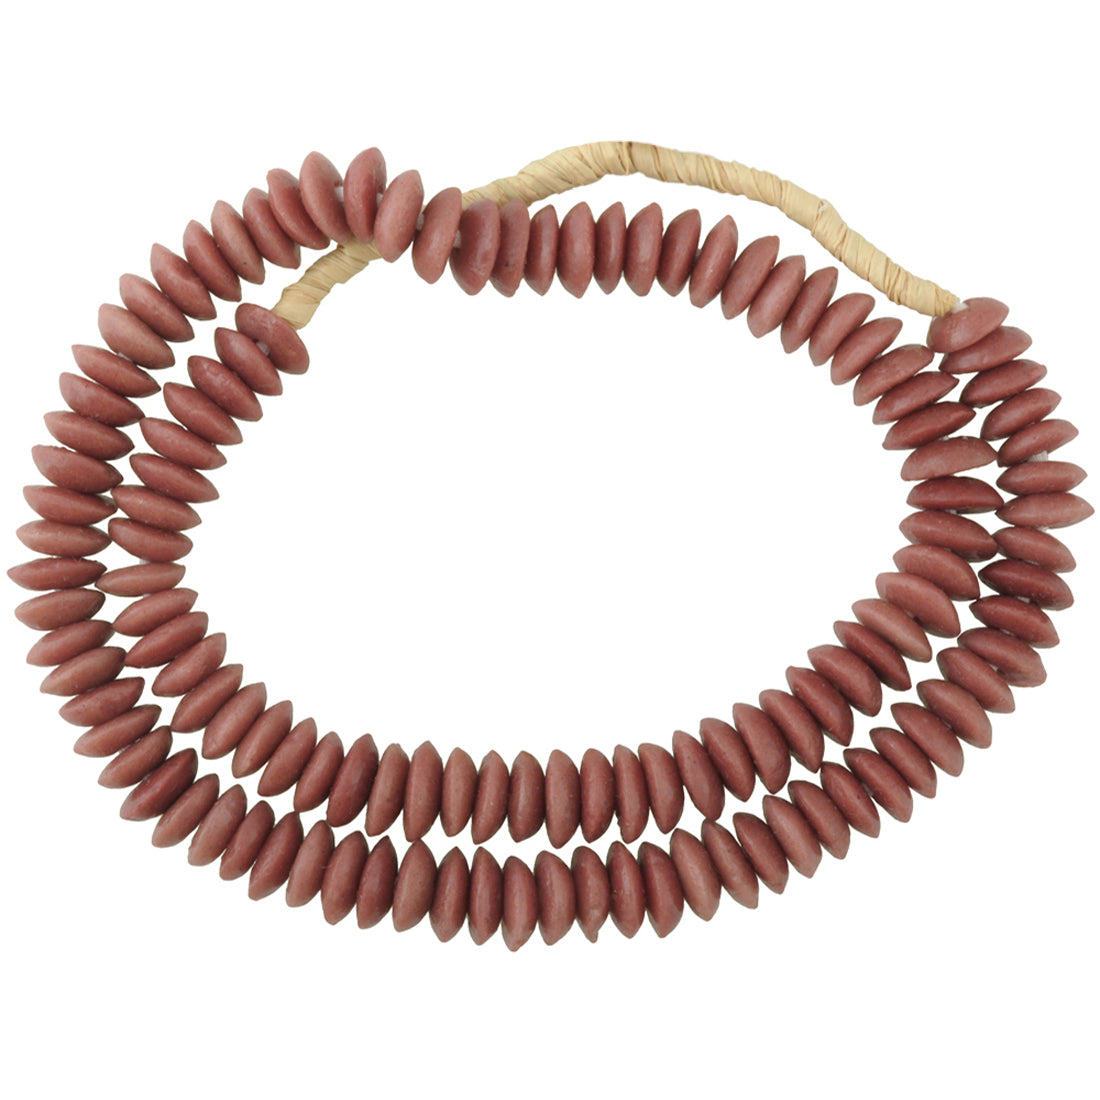 Krobo powder glass beads recycled handmade African trade disks spacers necklace - Tribalgh